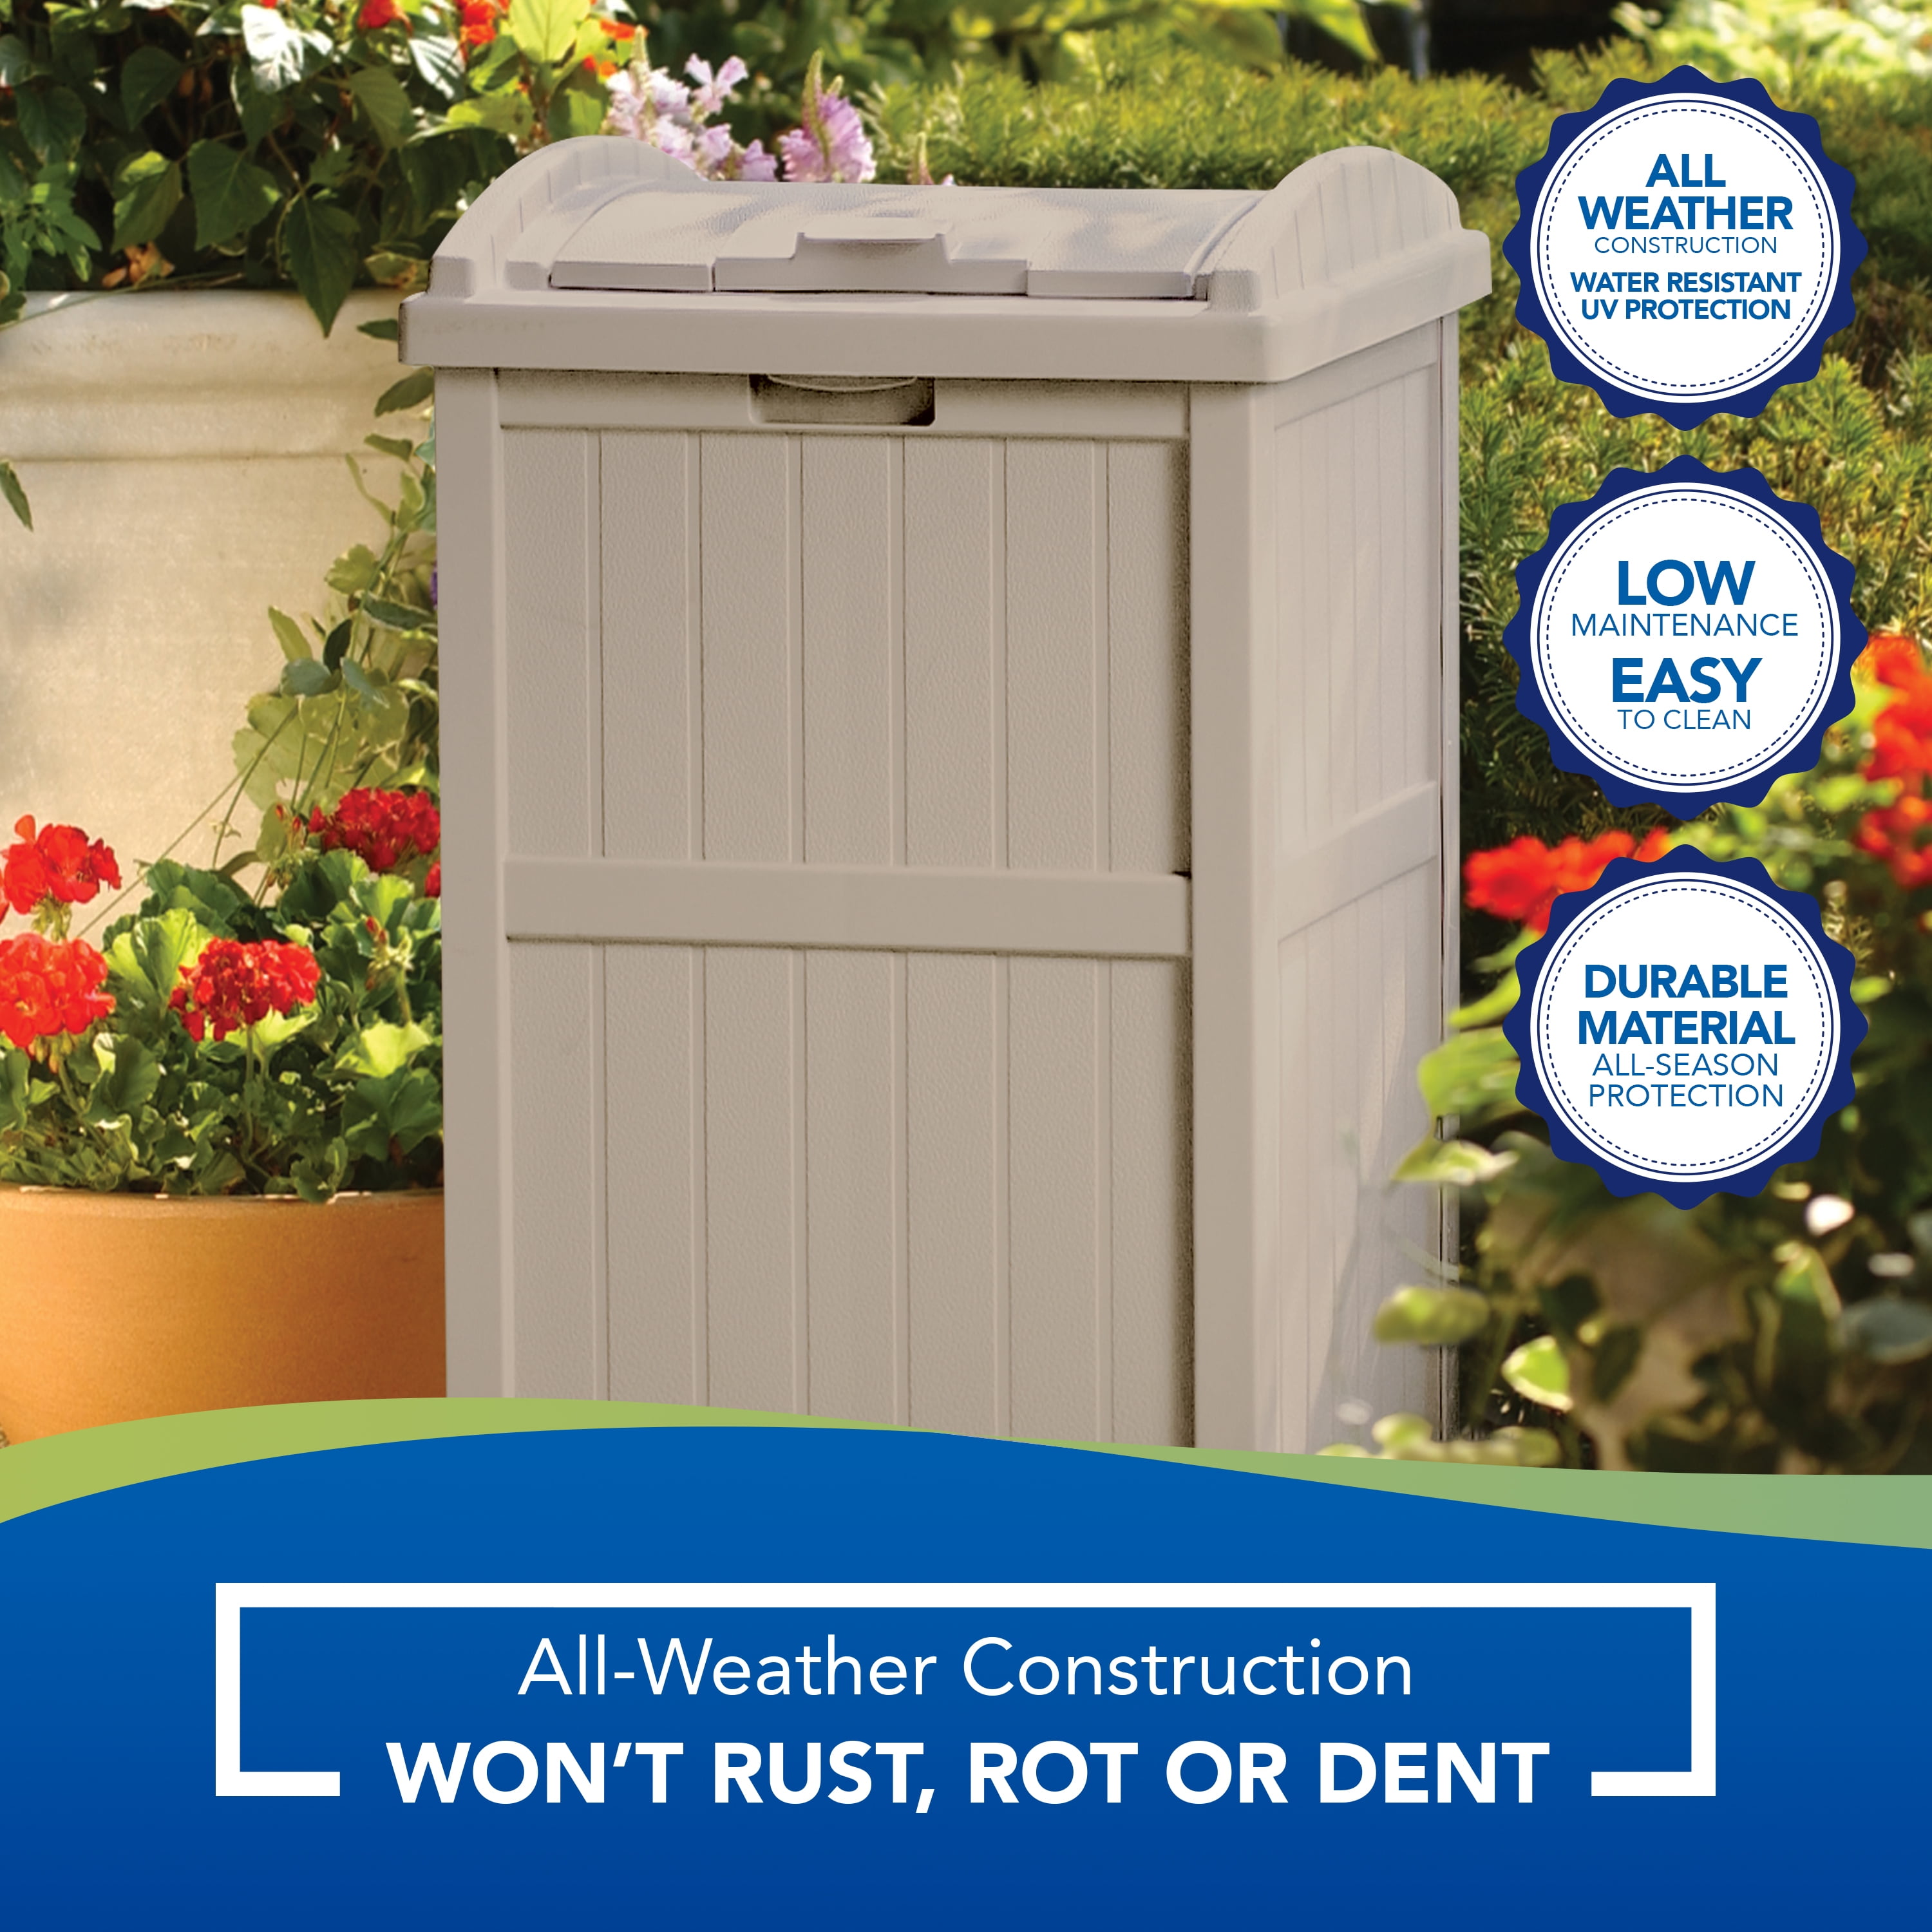 Suncast 30-33 Gallon Deck Patio Resin Garbage Trash Can Hideaway, Taupe (2  Pack) : Target